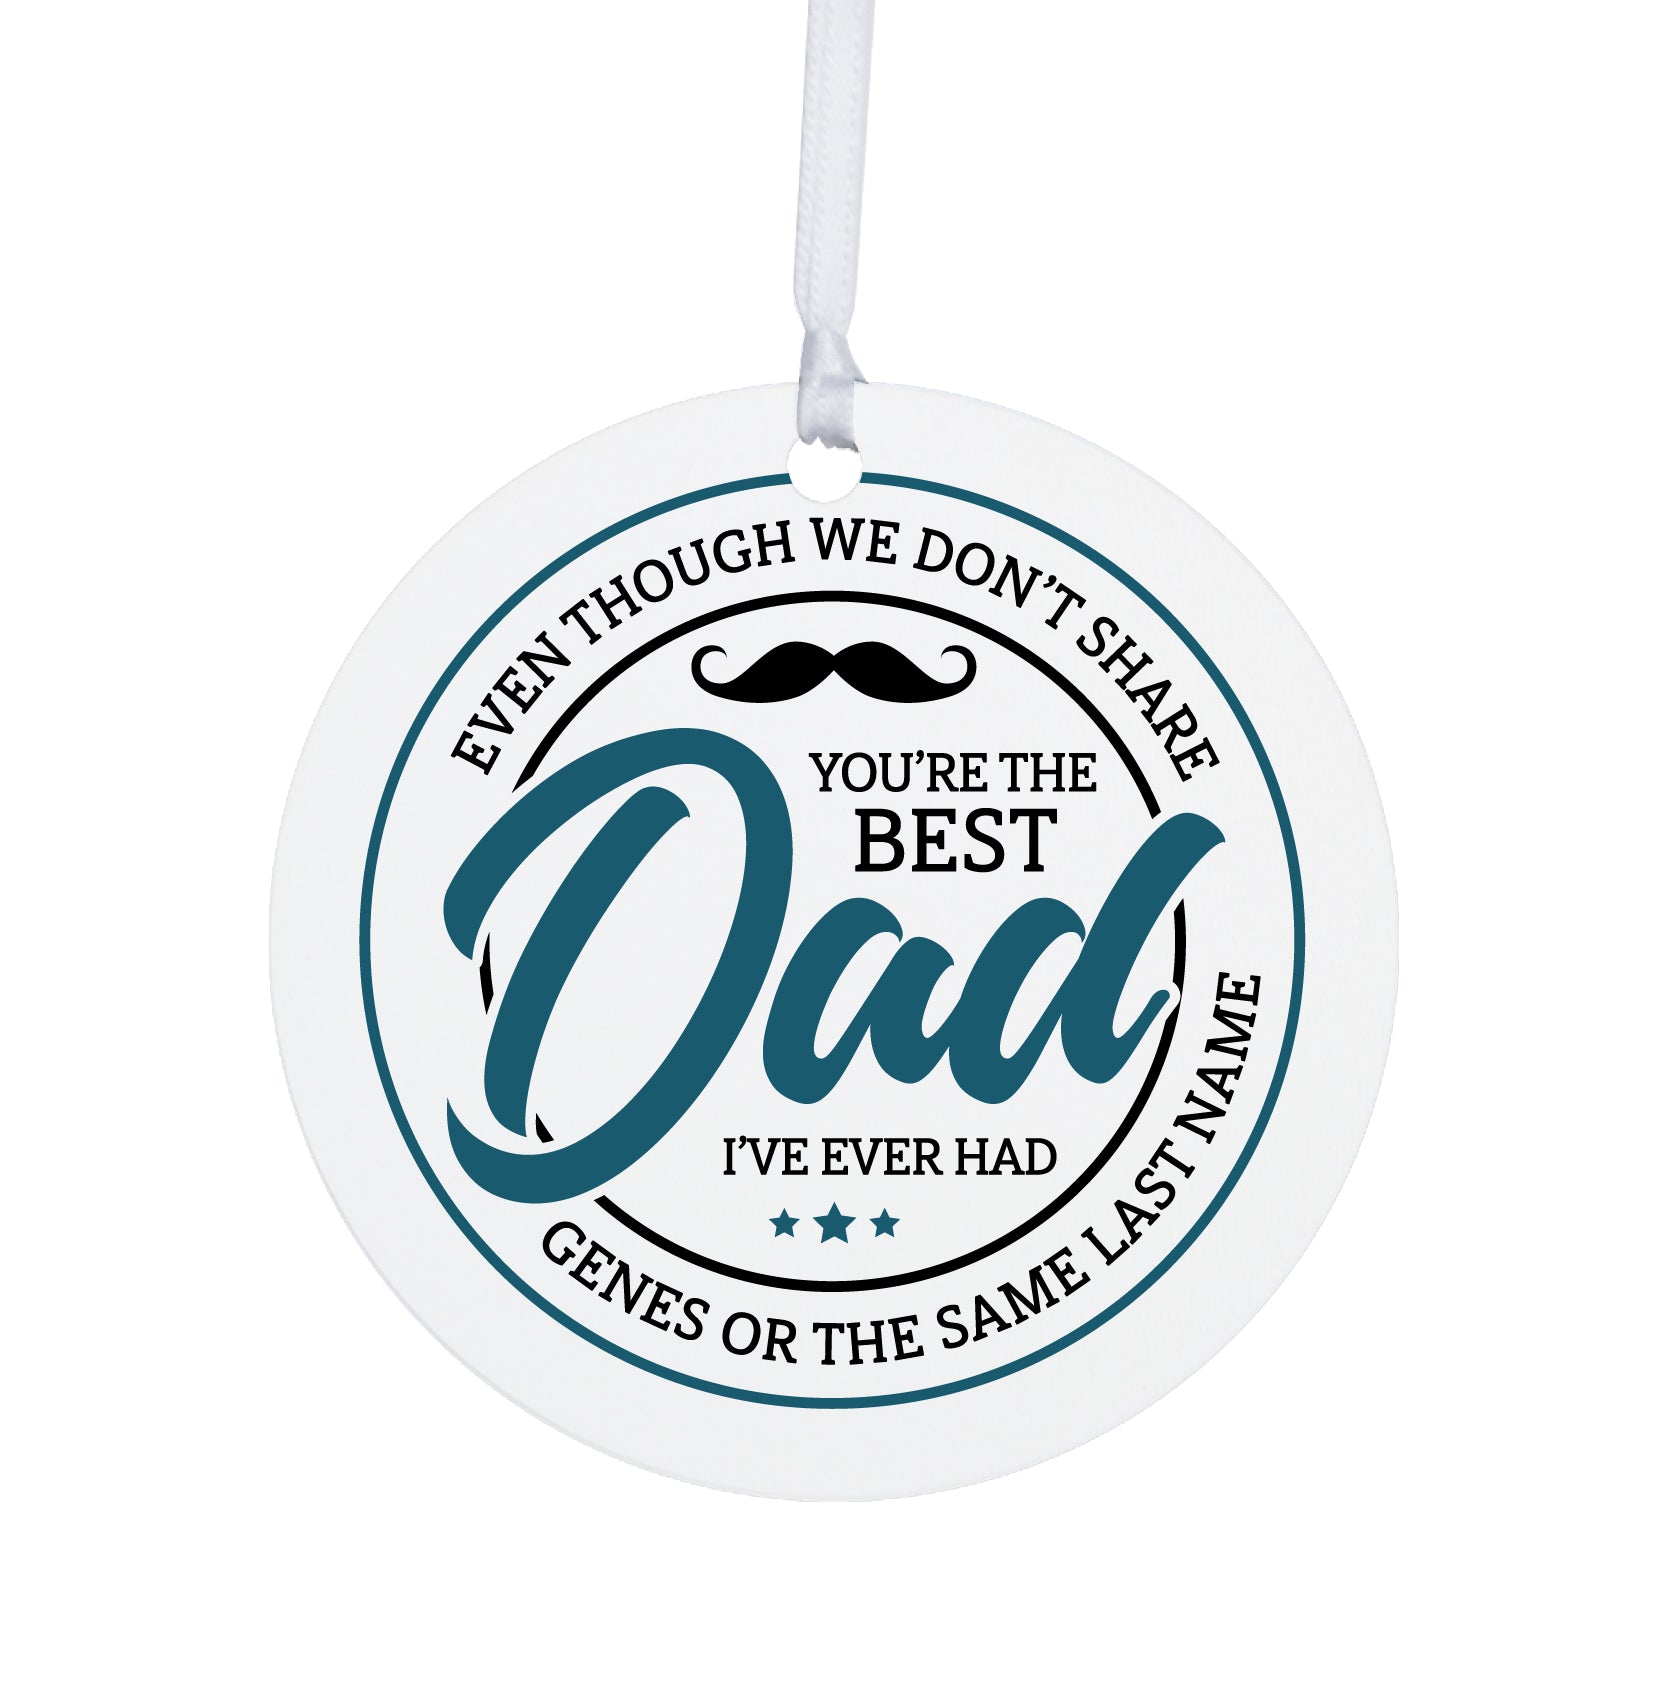 Stepdads White Ornament With Inspirational Message Gift Ideas - Even Though We Didn’t Share You’re The Best Dad - LifeSong Milestones